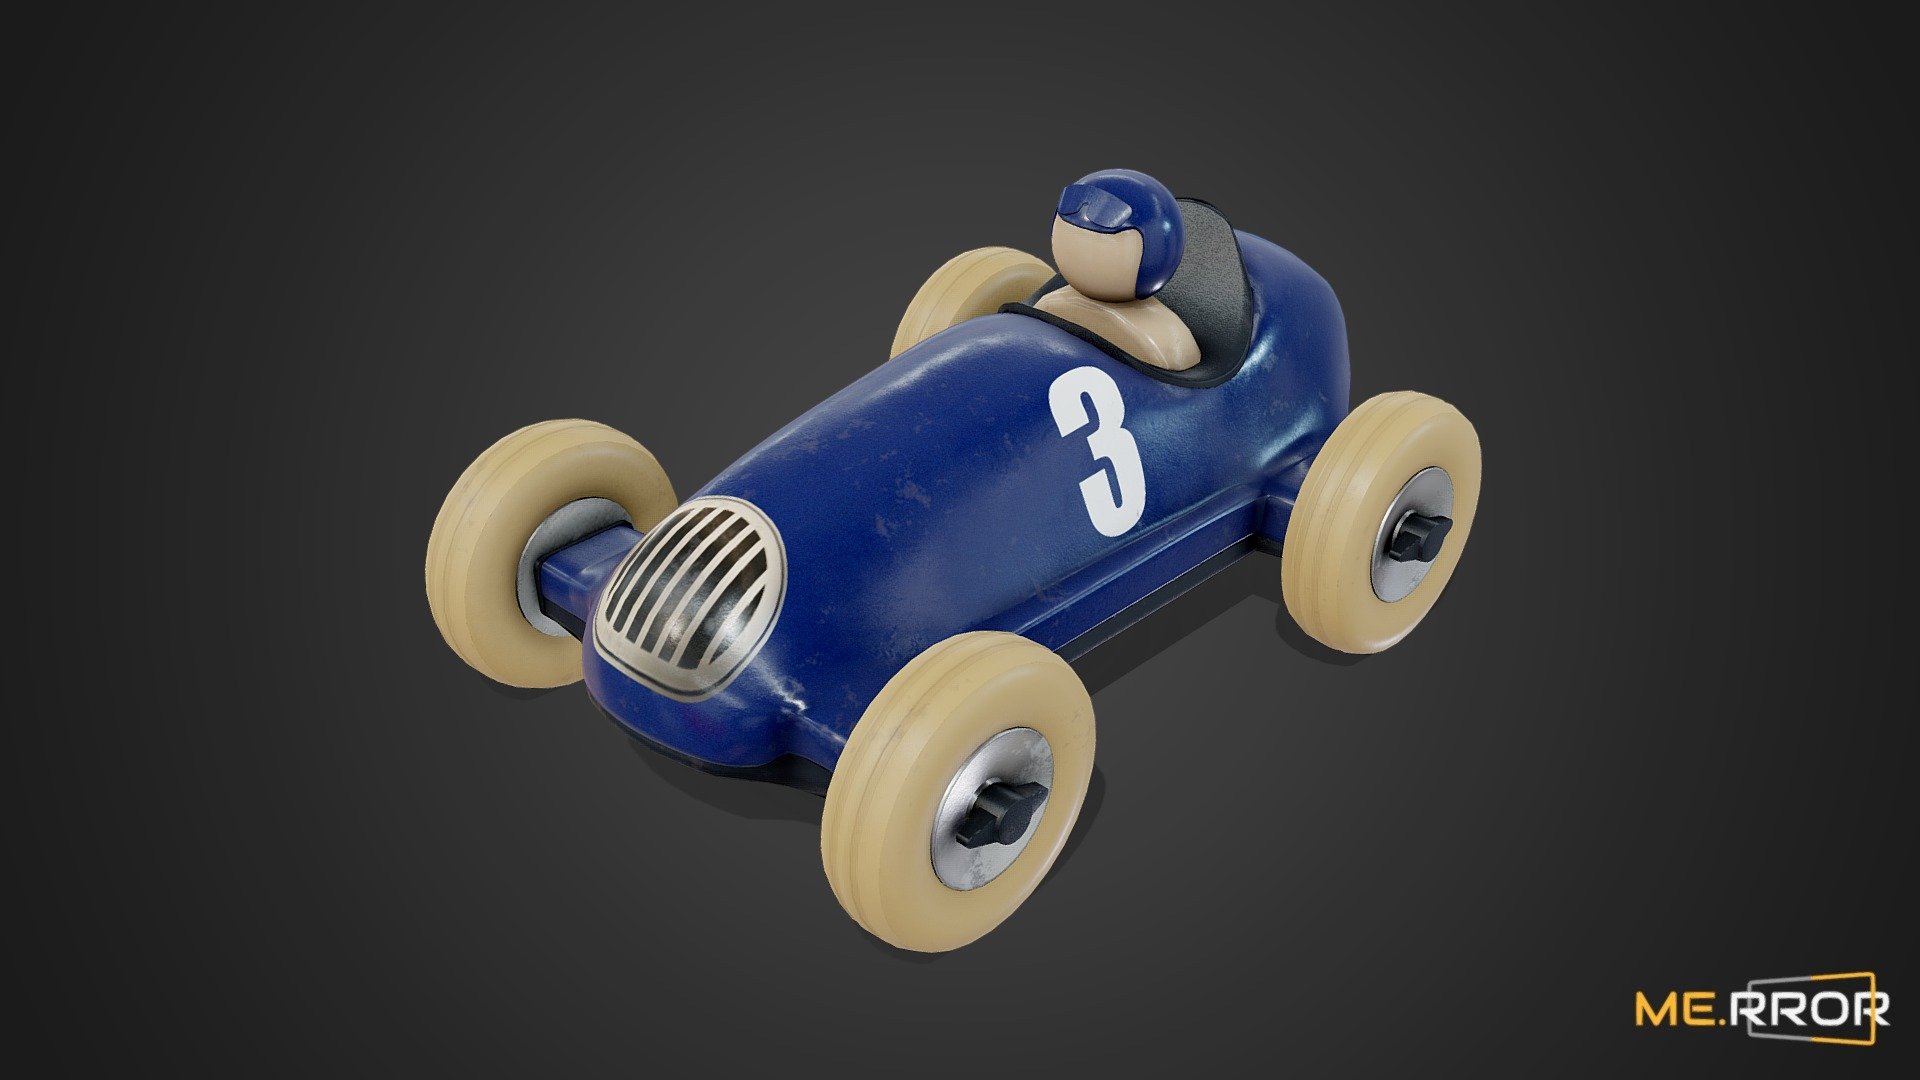 MERROR is a 3D Content PLATFORM which introduces various Asian assets to the 3D world


3DScanning #Photogrametry #ME.RROR - [Game-Ready] Old Toy Car - Buy Royalty Free 3D model by ME.RROR (@merror) 3d model